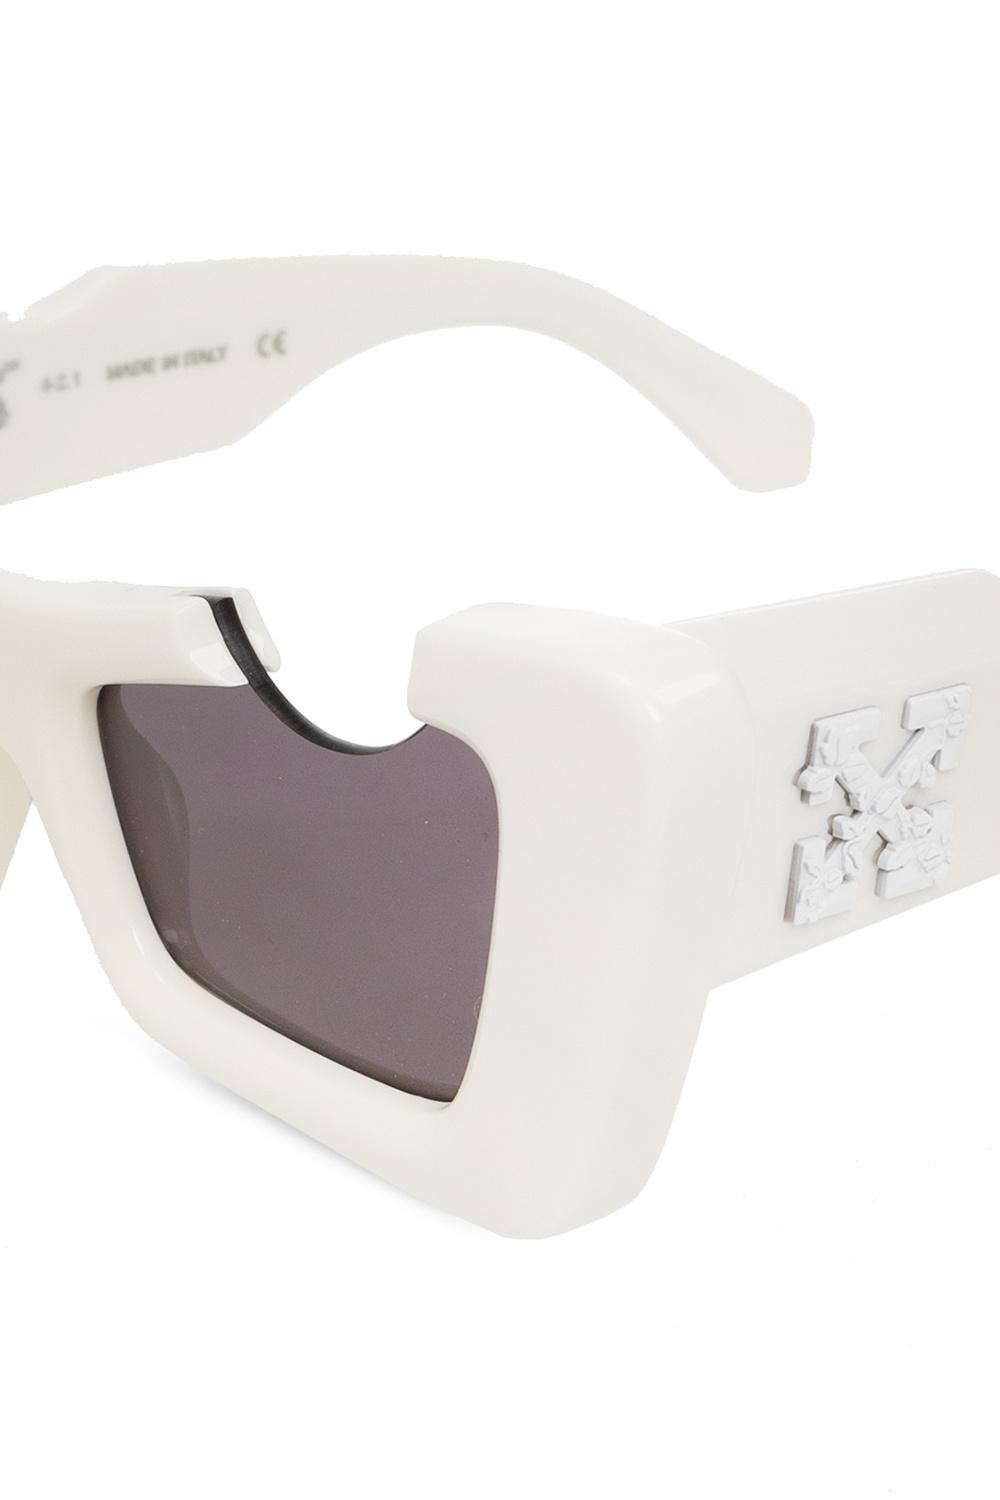 Off-White c/o Virgil Abloh - Off-White™ sunglasses now available